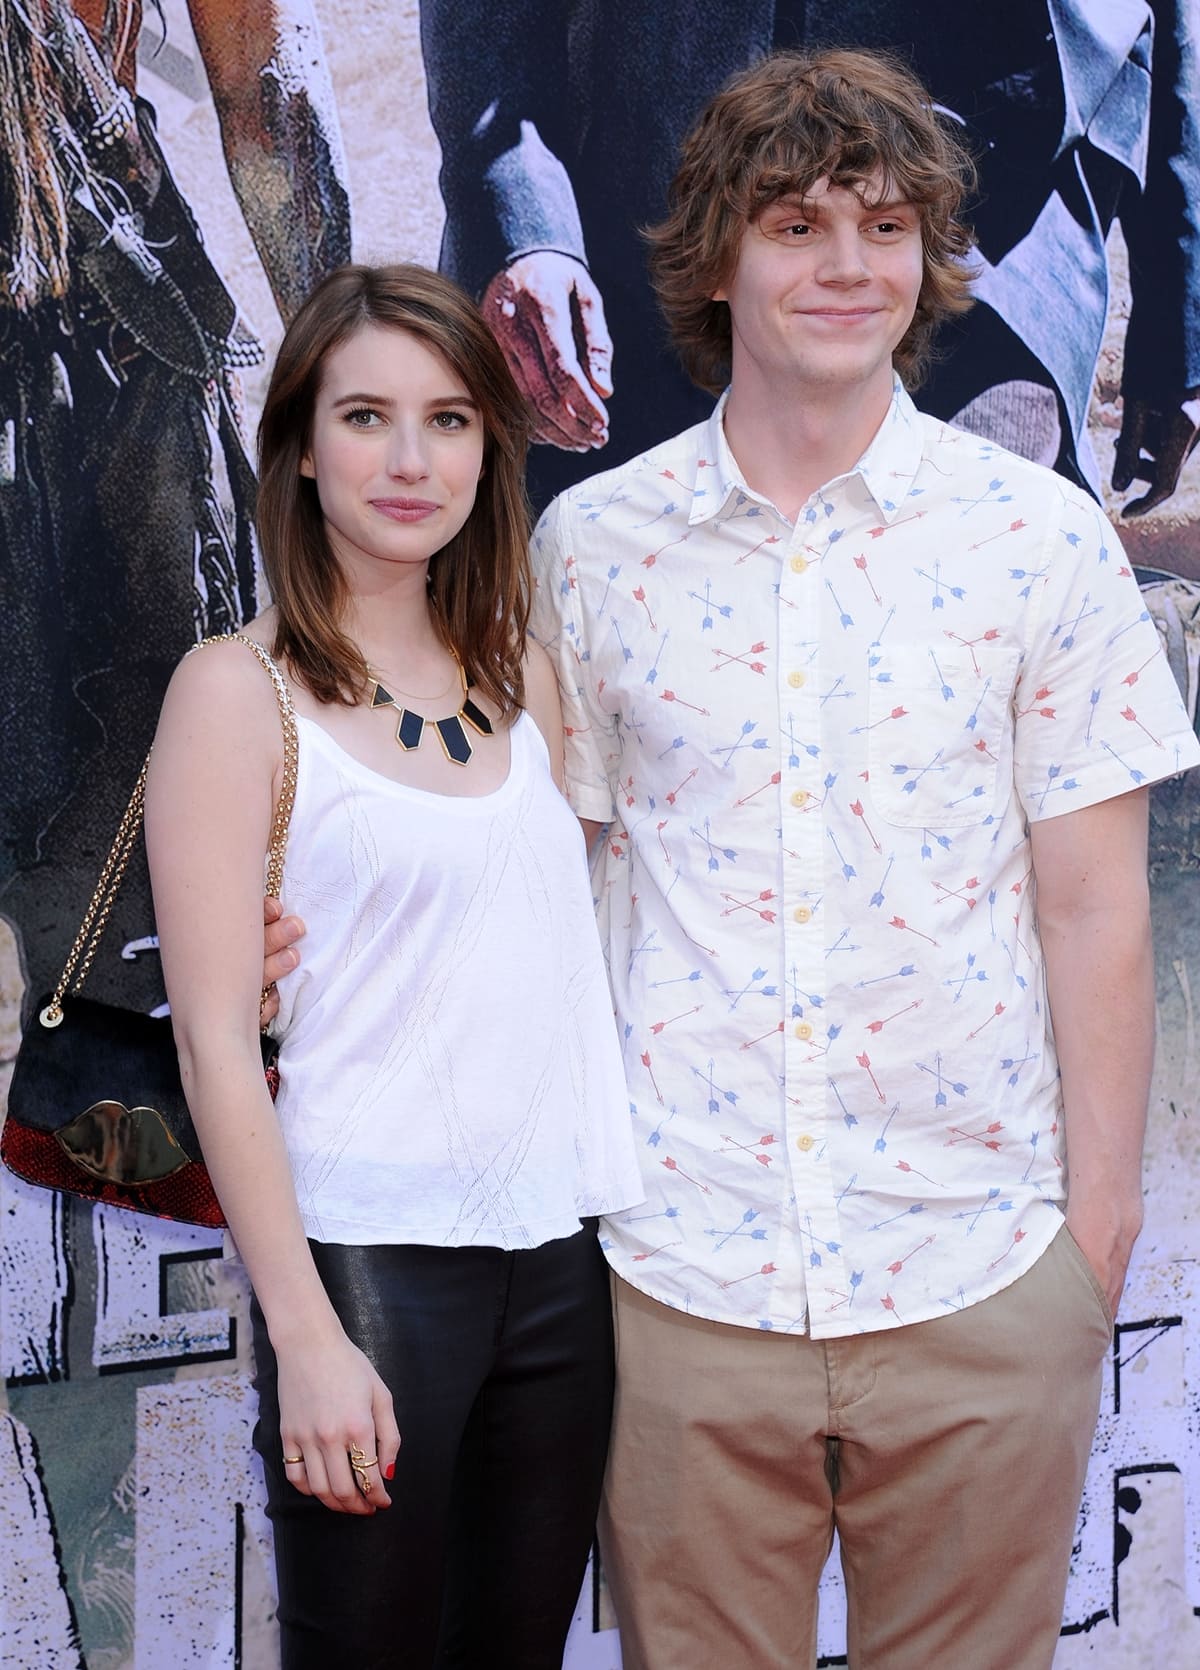 Emma Roberts and Evan Peters started dating in 2012 after meeting on the set of Adult World and split in 2019